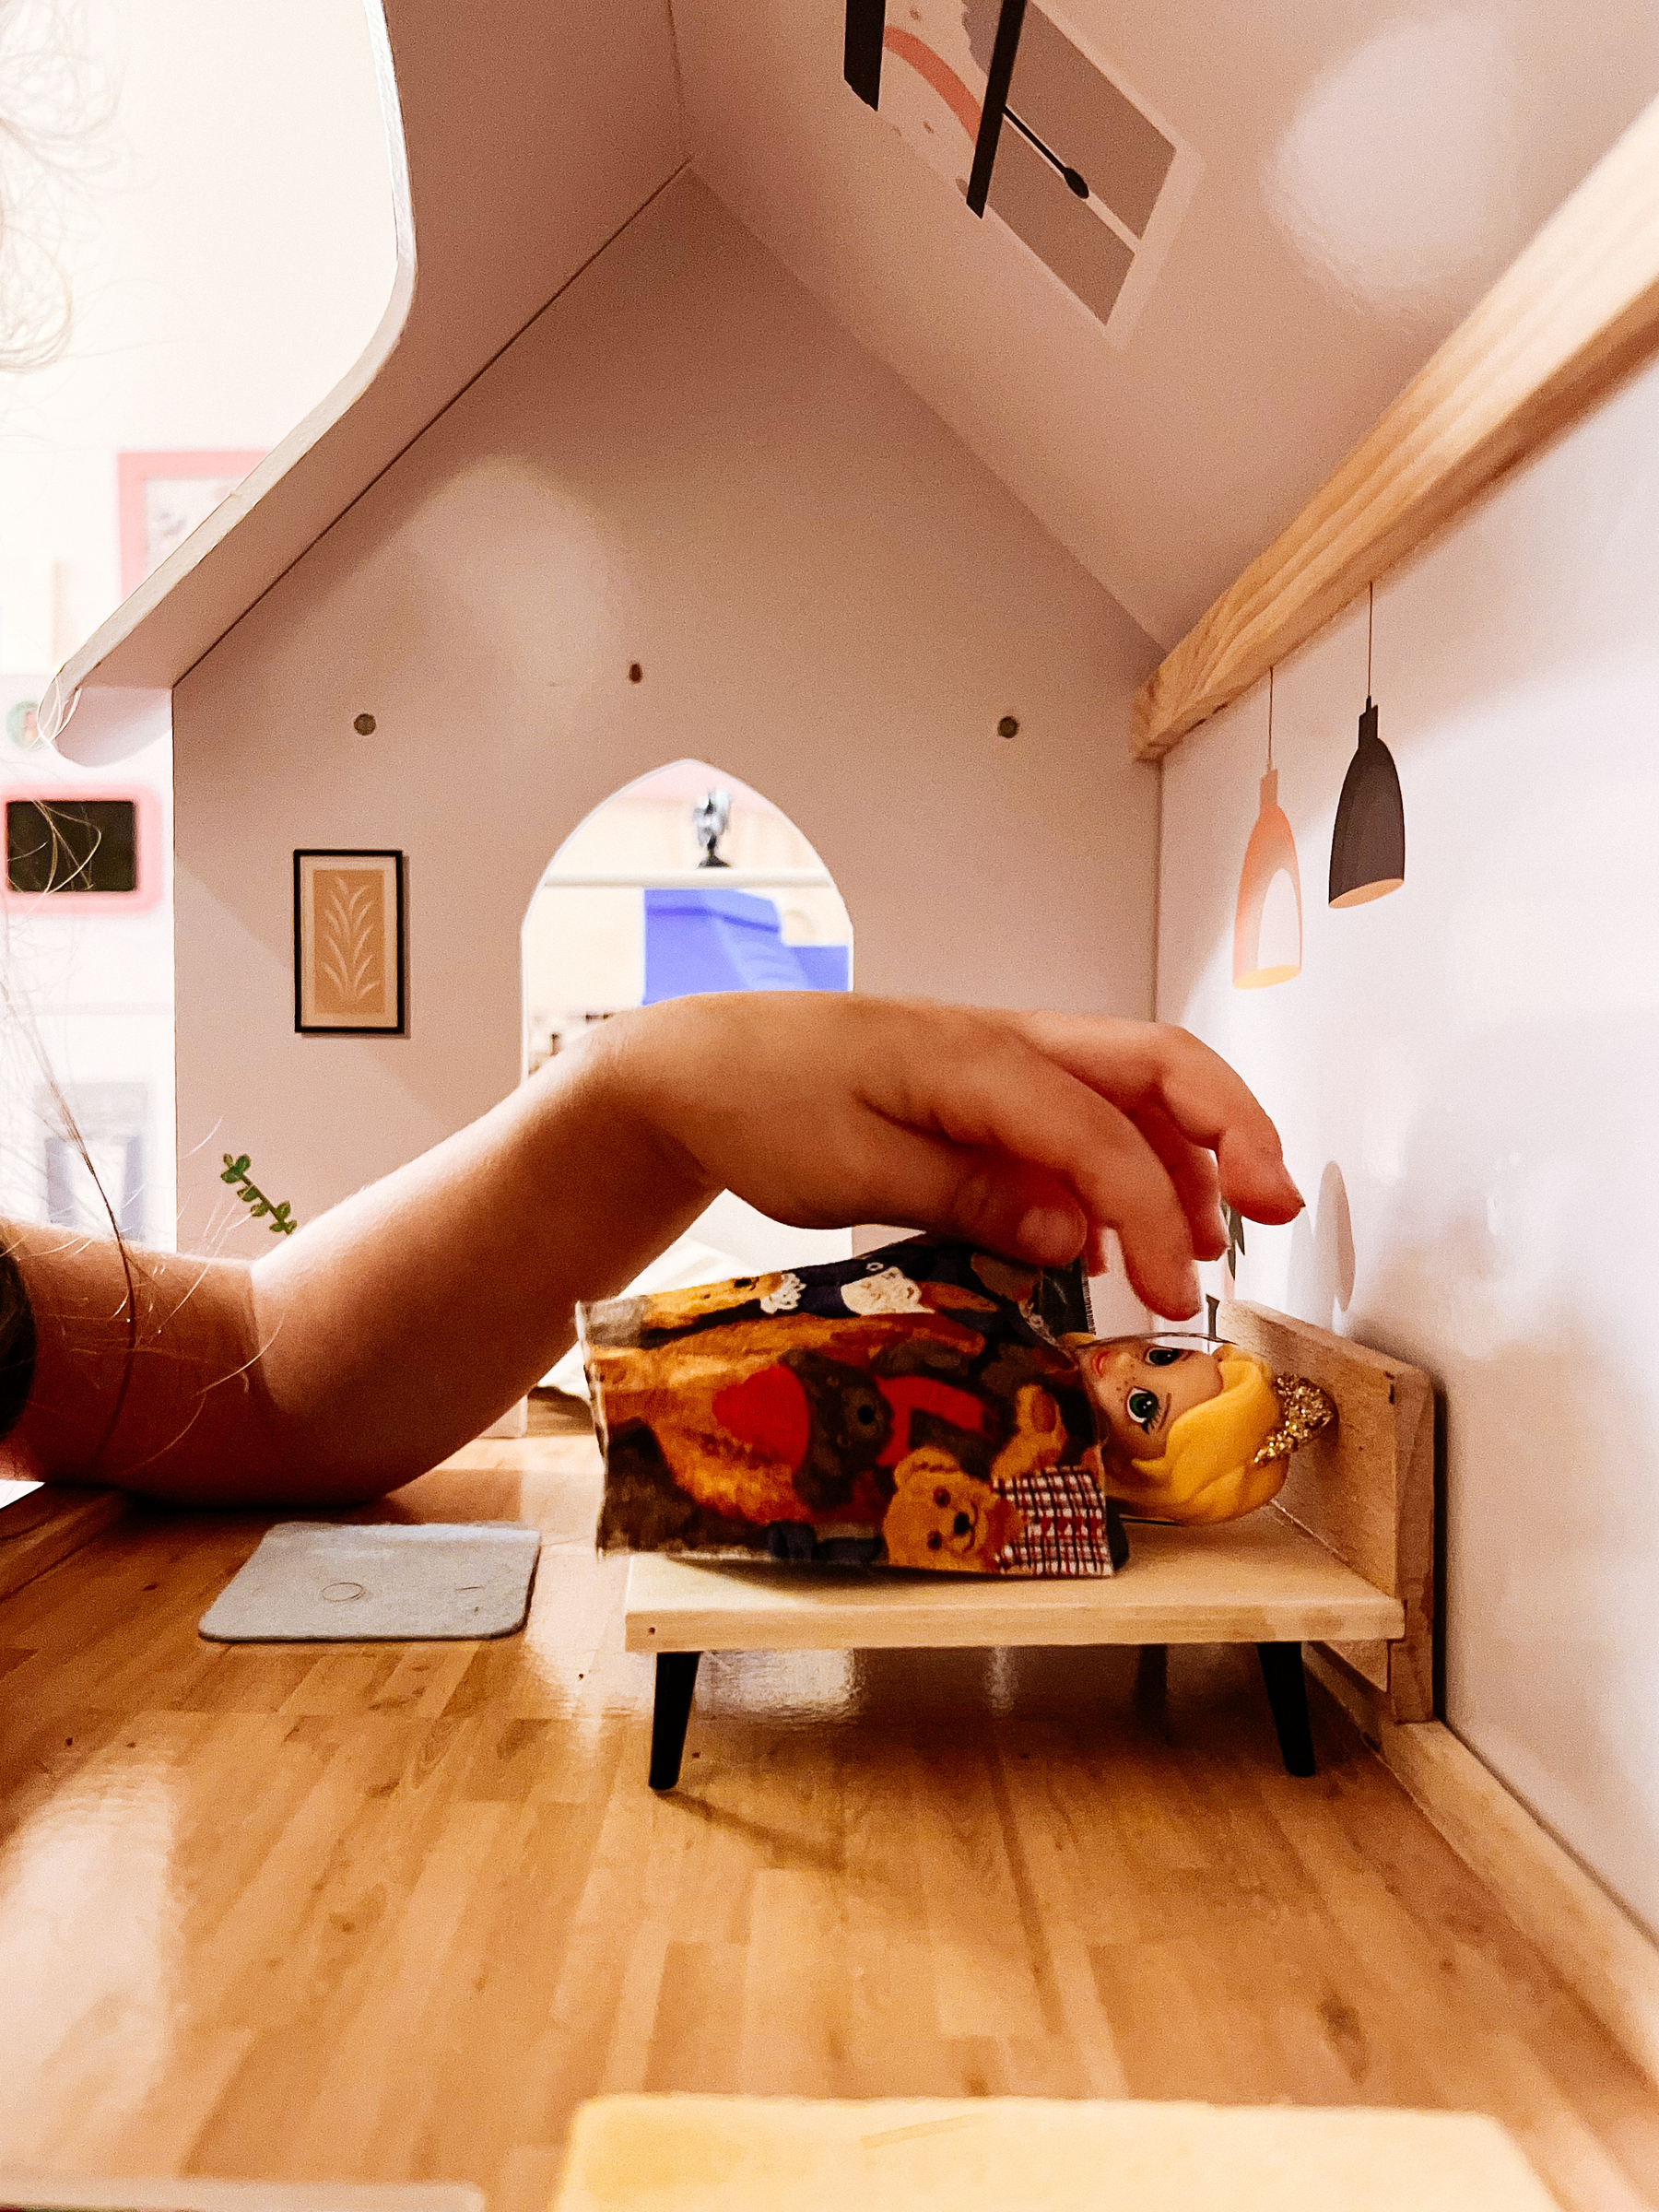 A child&rsquo;s hand playing with a small toy figure inside a dollhouse, focusing on arranging the figure on a miniature bed.